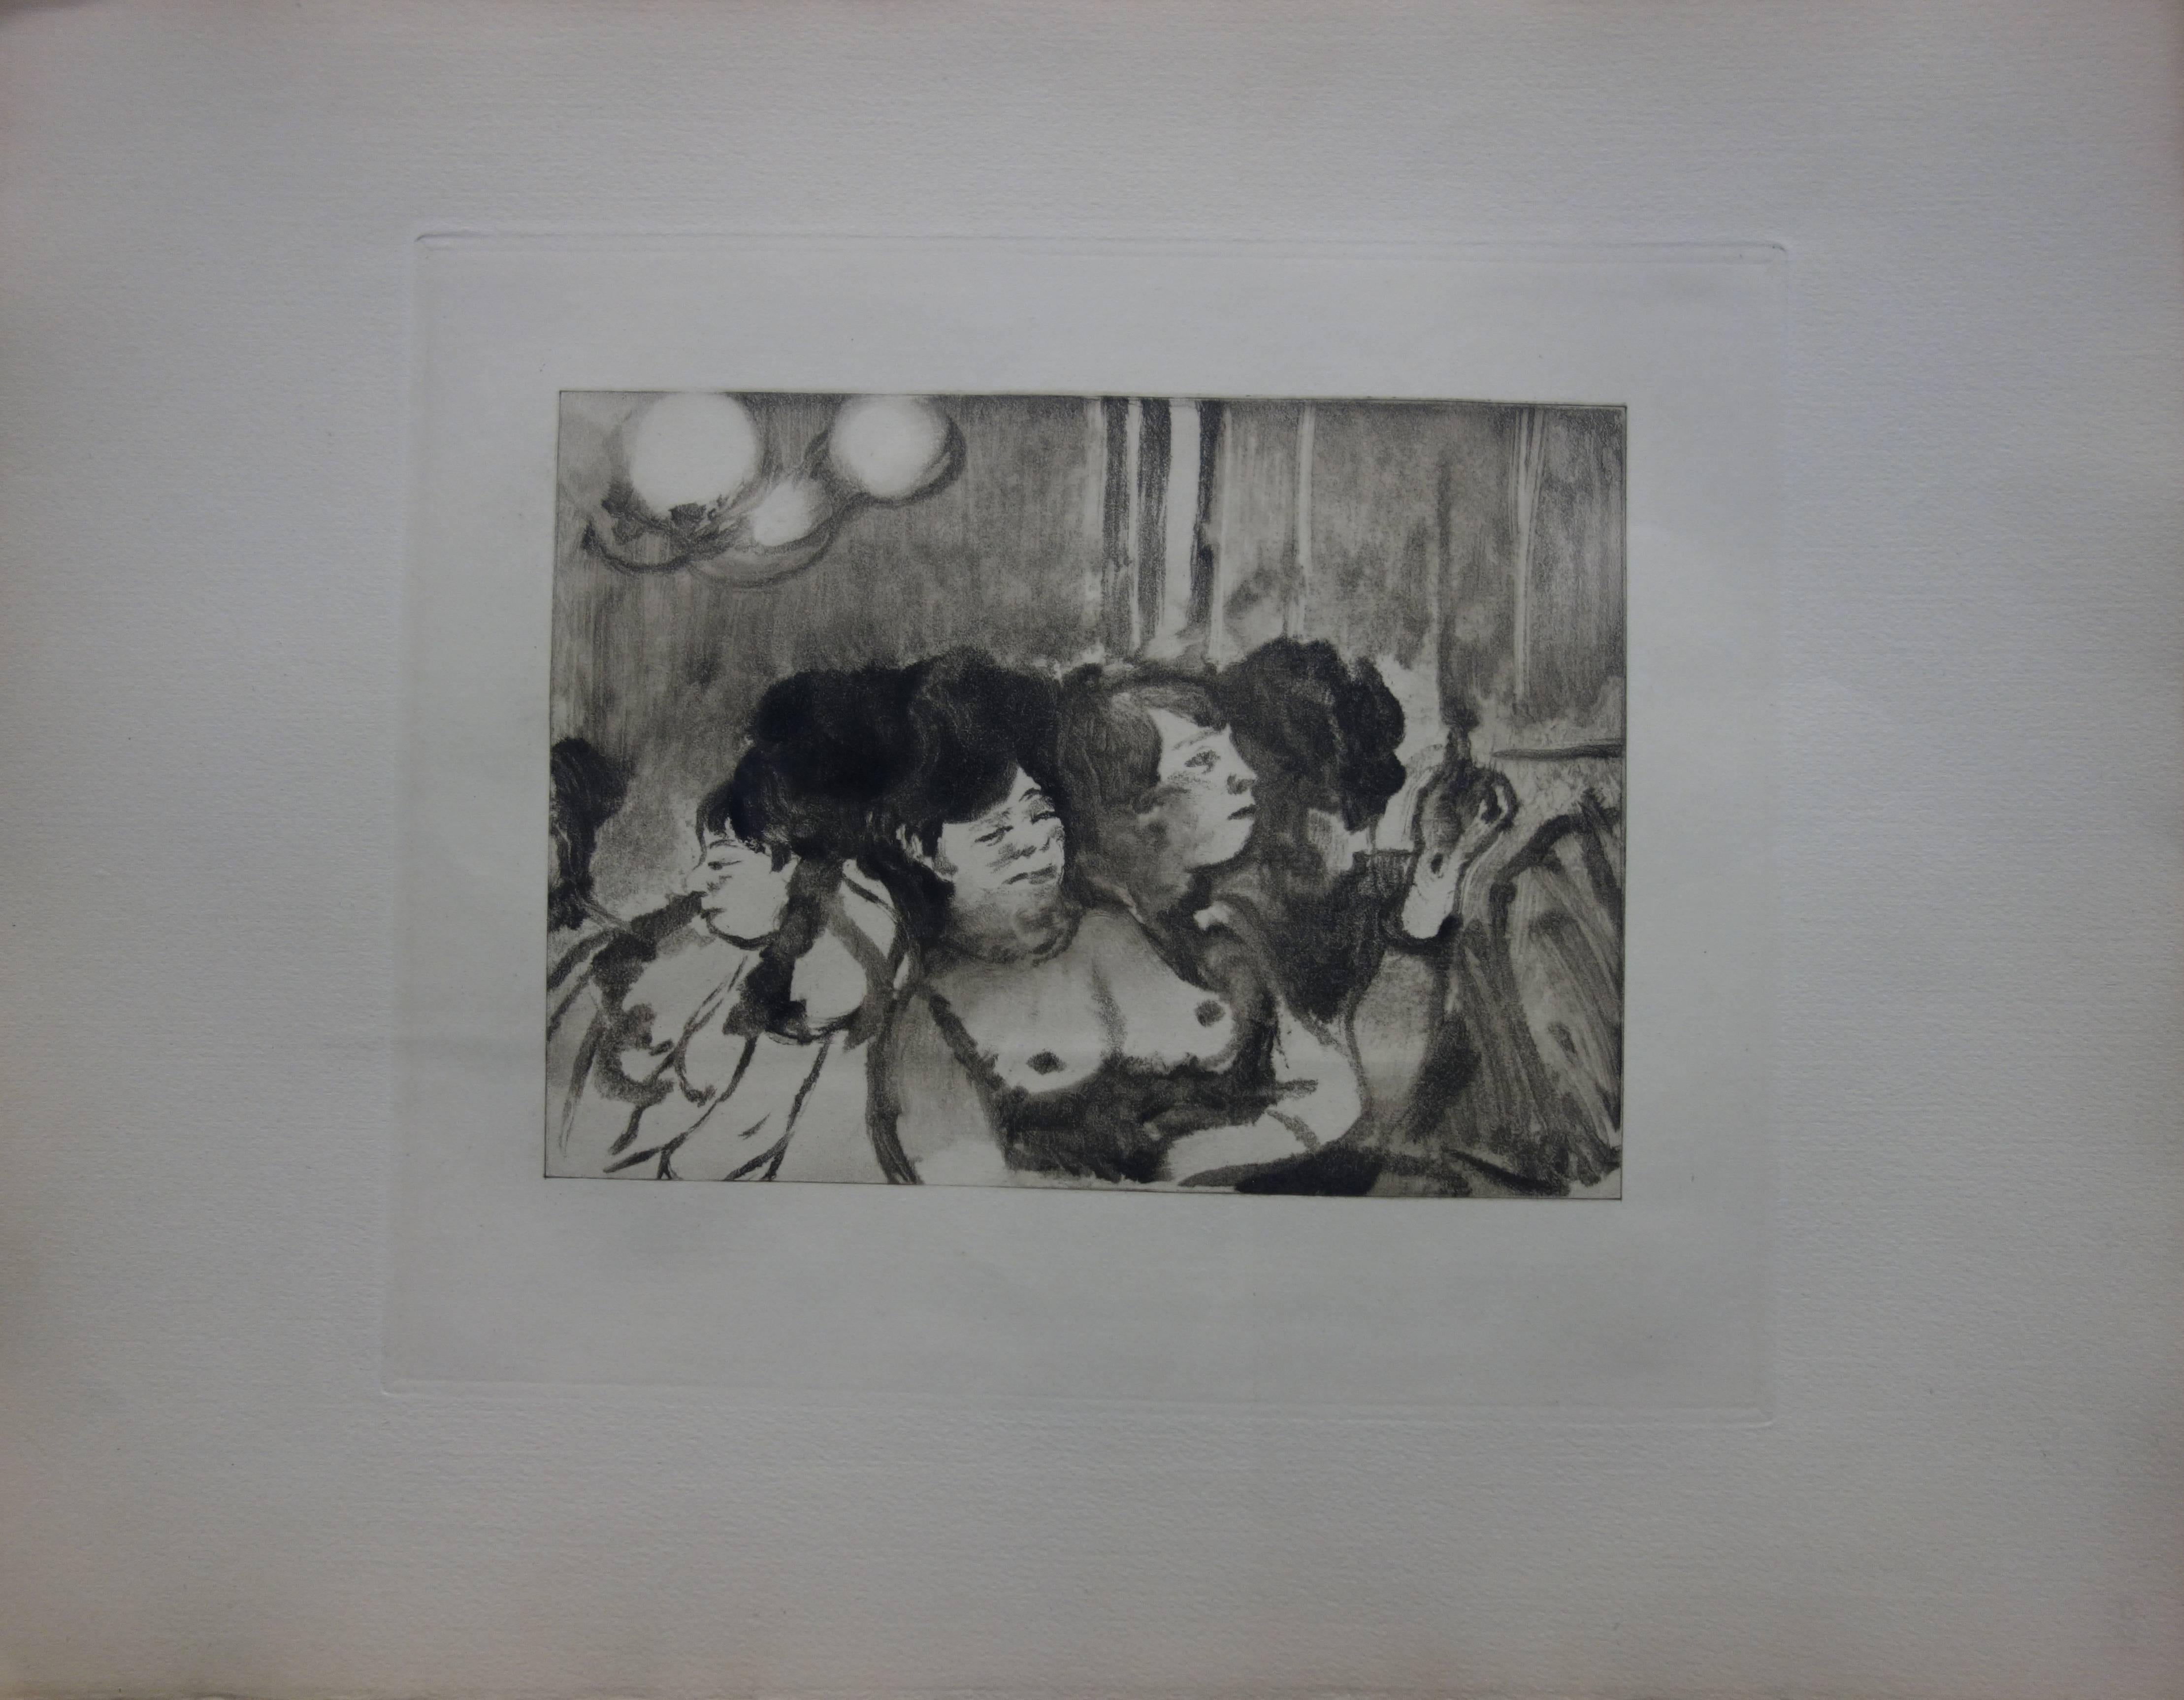 Whorehouse Scene : A Group of Prostitutes  - Original etching - Print by (after) Edgar Degas